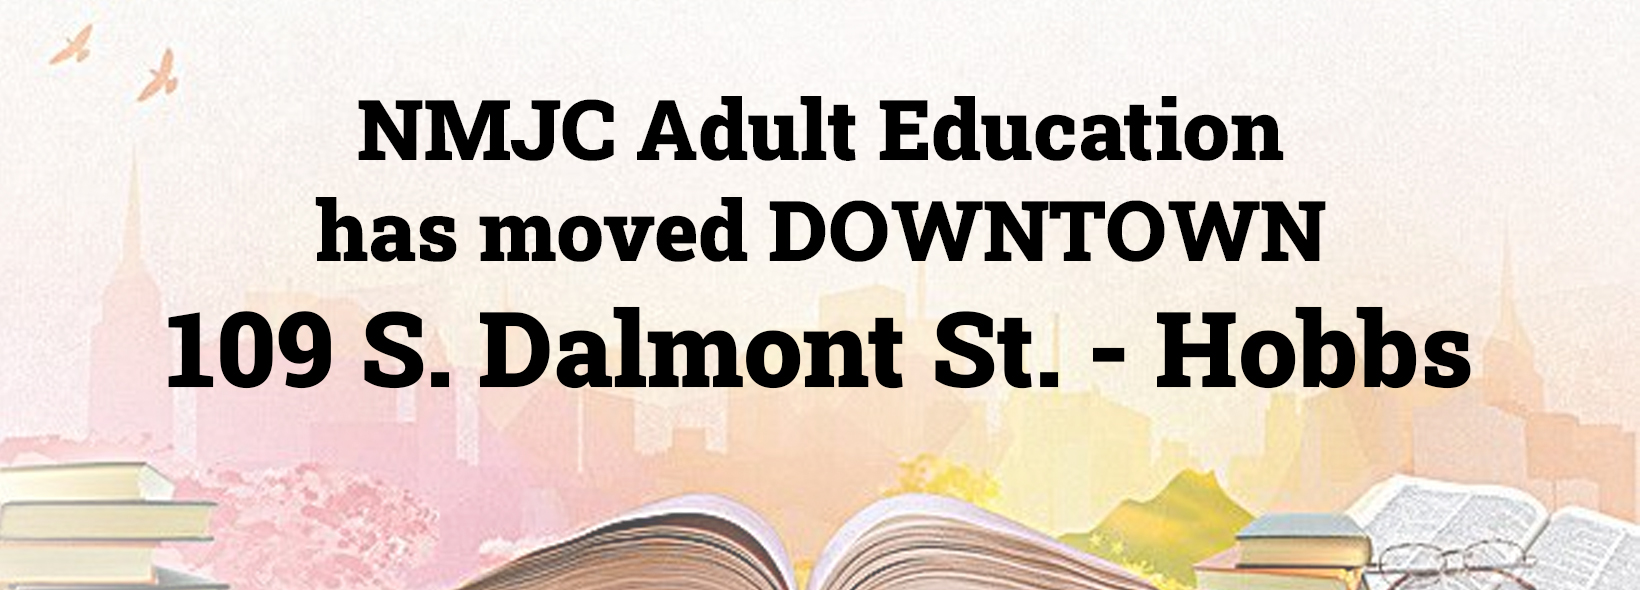 Adult Basic Education has moved locations. 